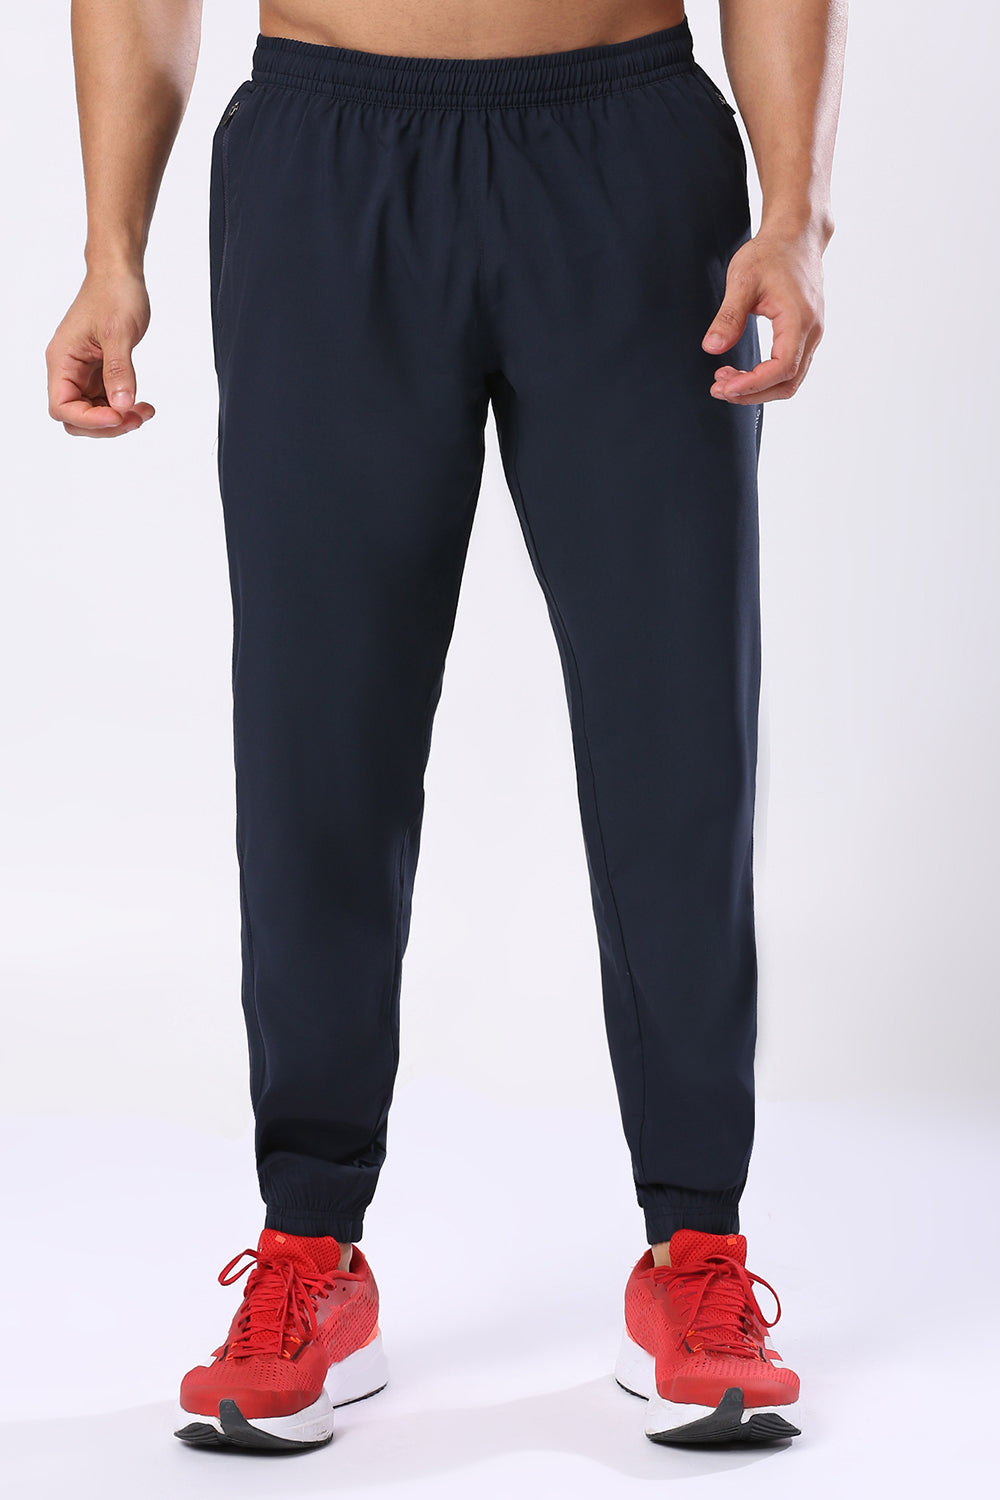 Buy Jogger For Women Online In India, Shop Women's Jogger In India